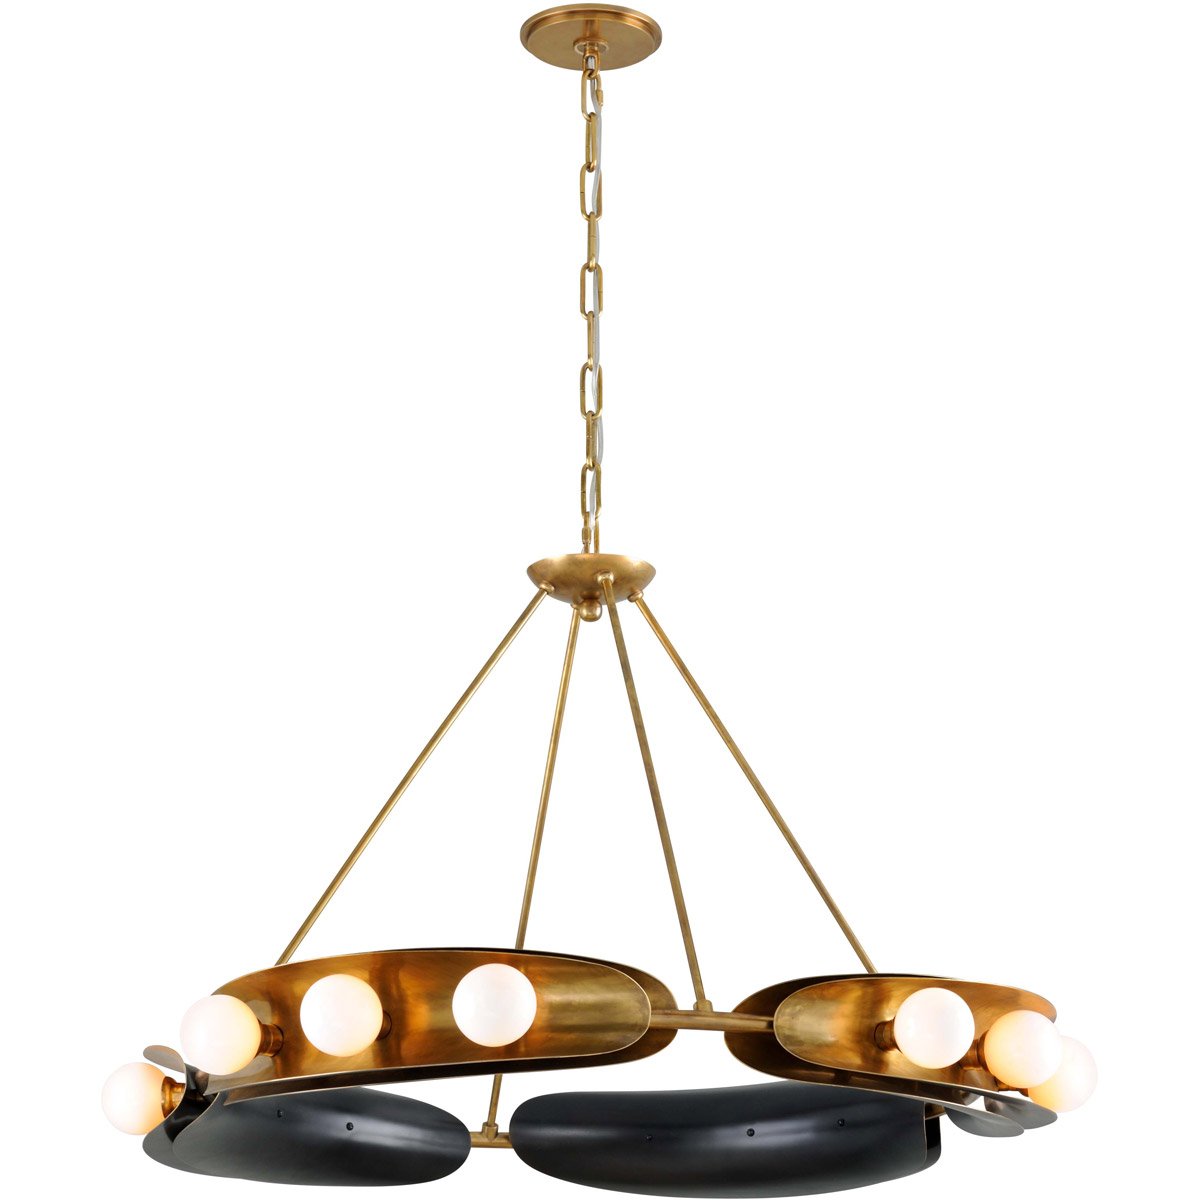 Haskell Small Chandelier Antique Brass